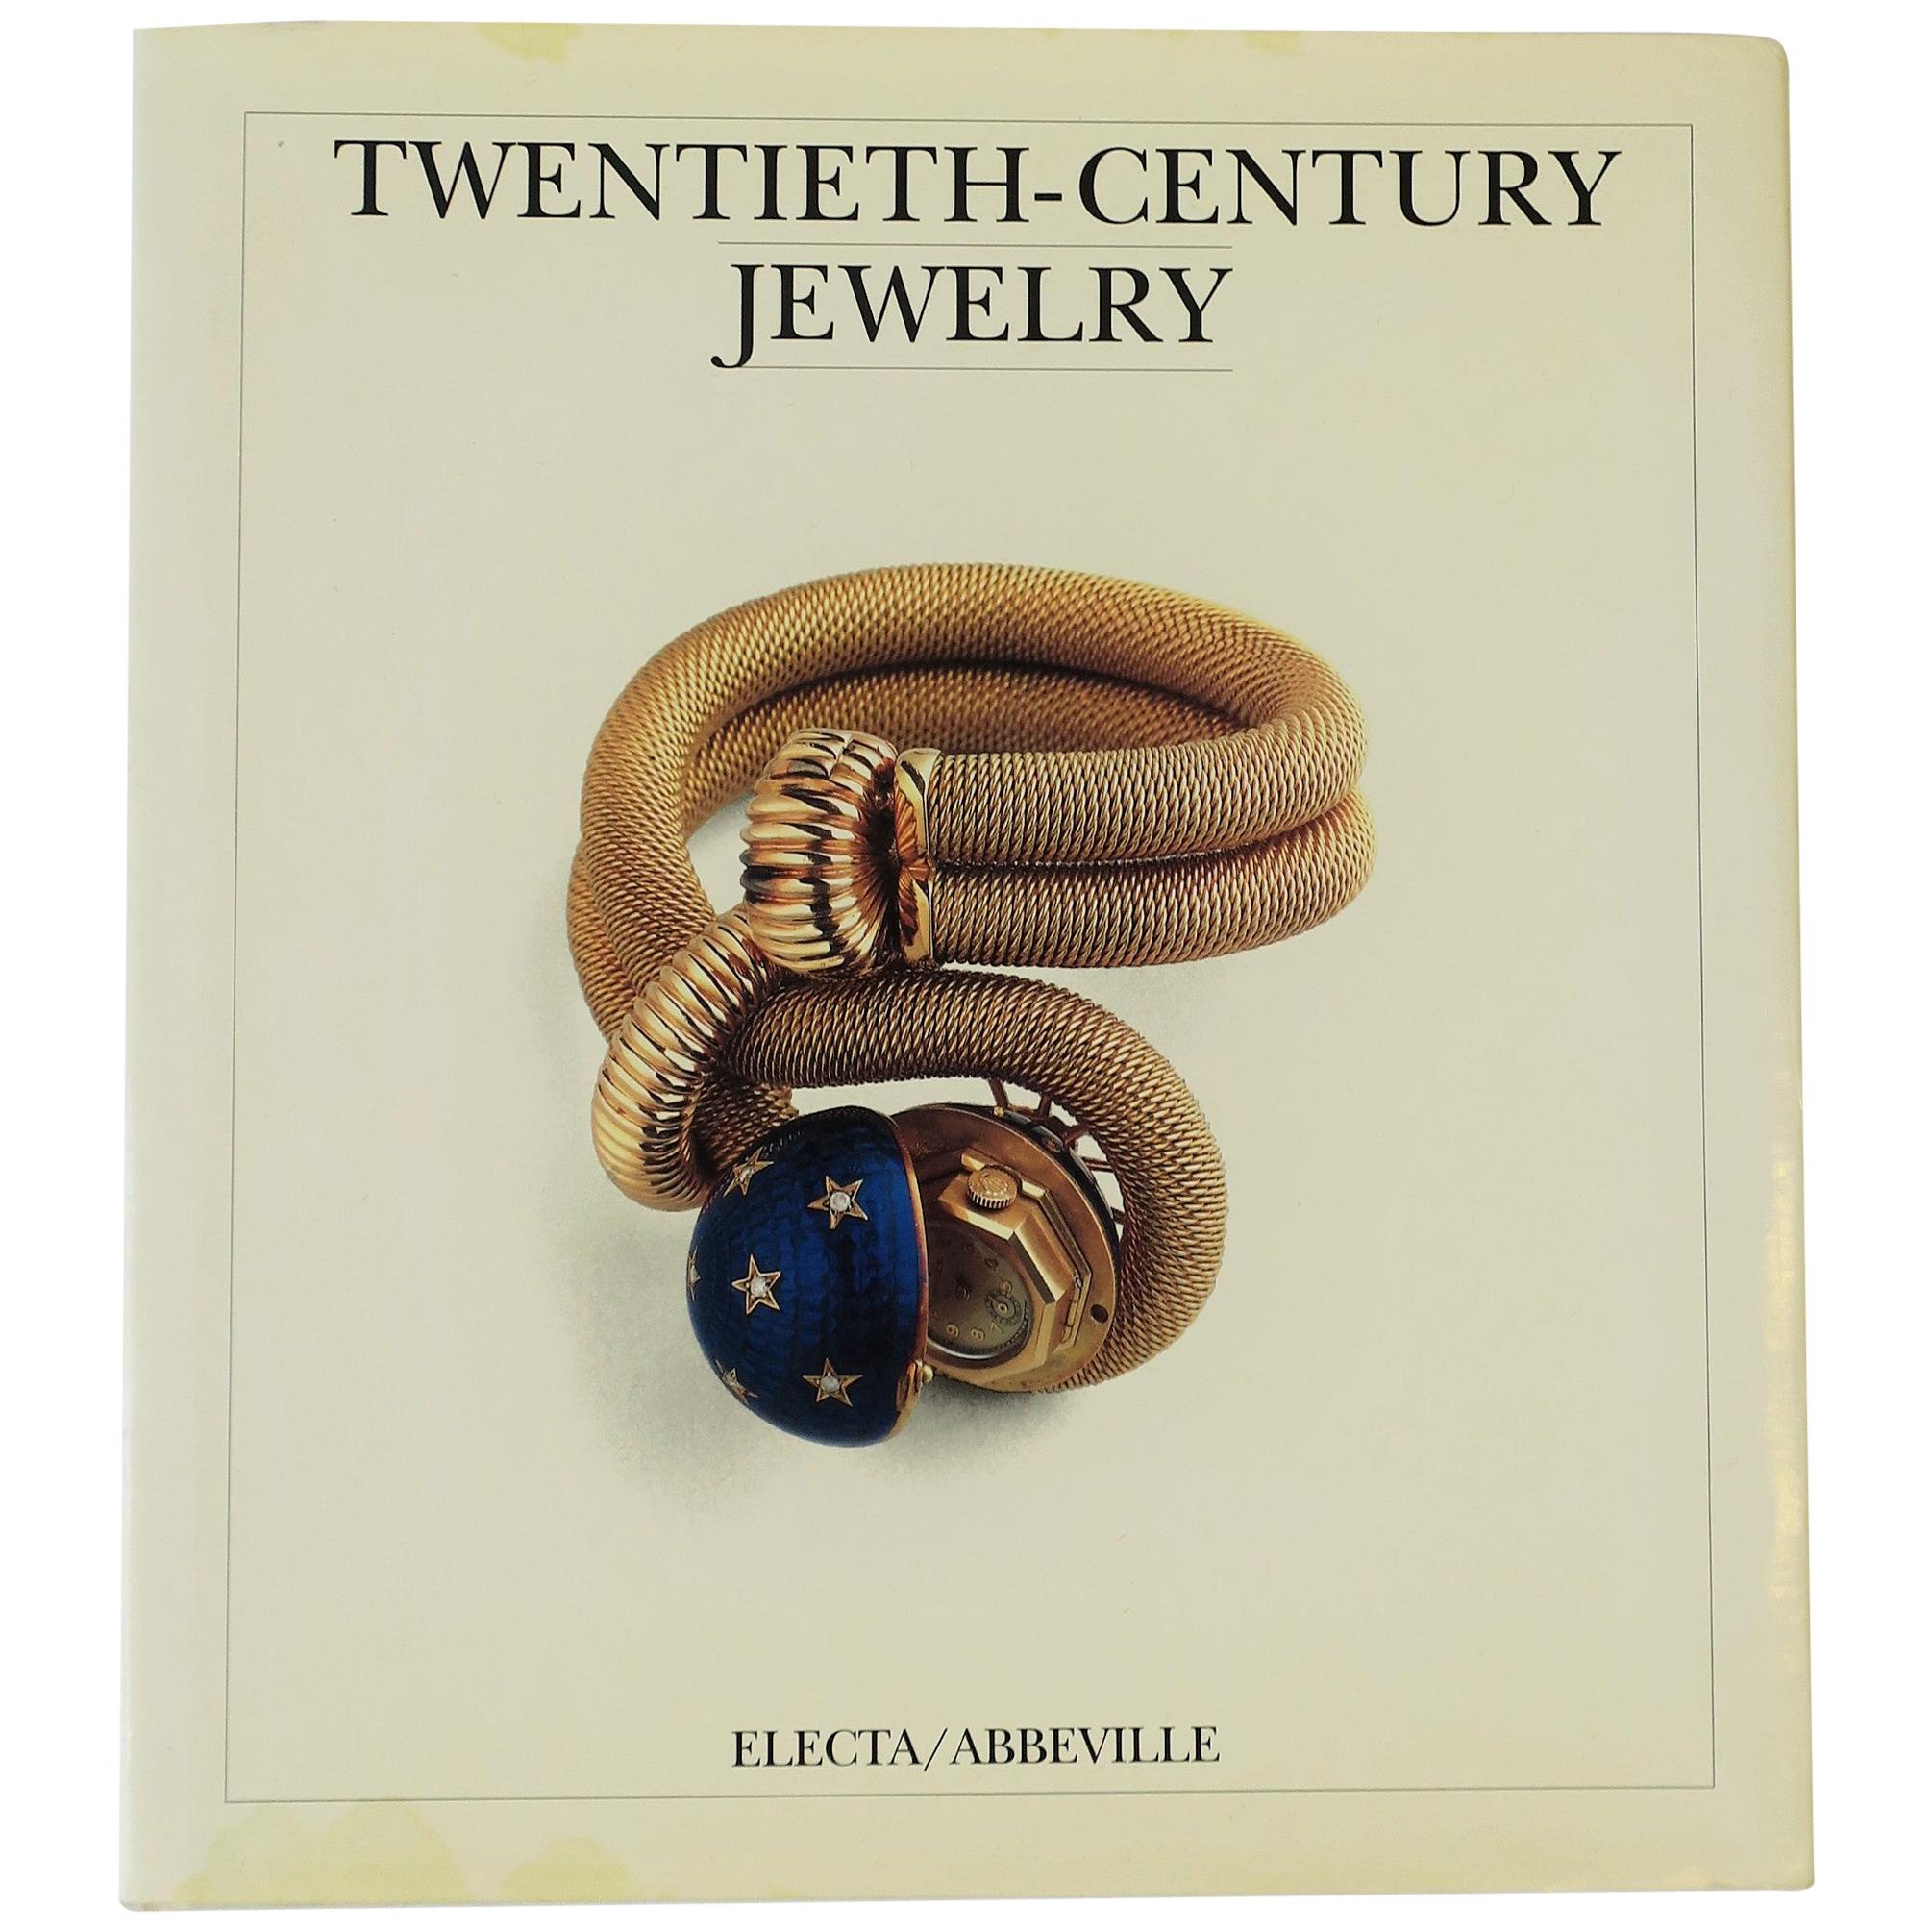 20th Century Jewelry Art Nouveau to Modern Coffee Table or Library Book, 1990s